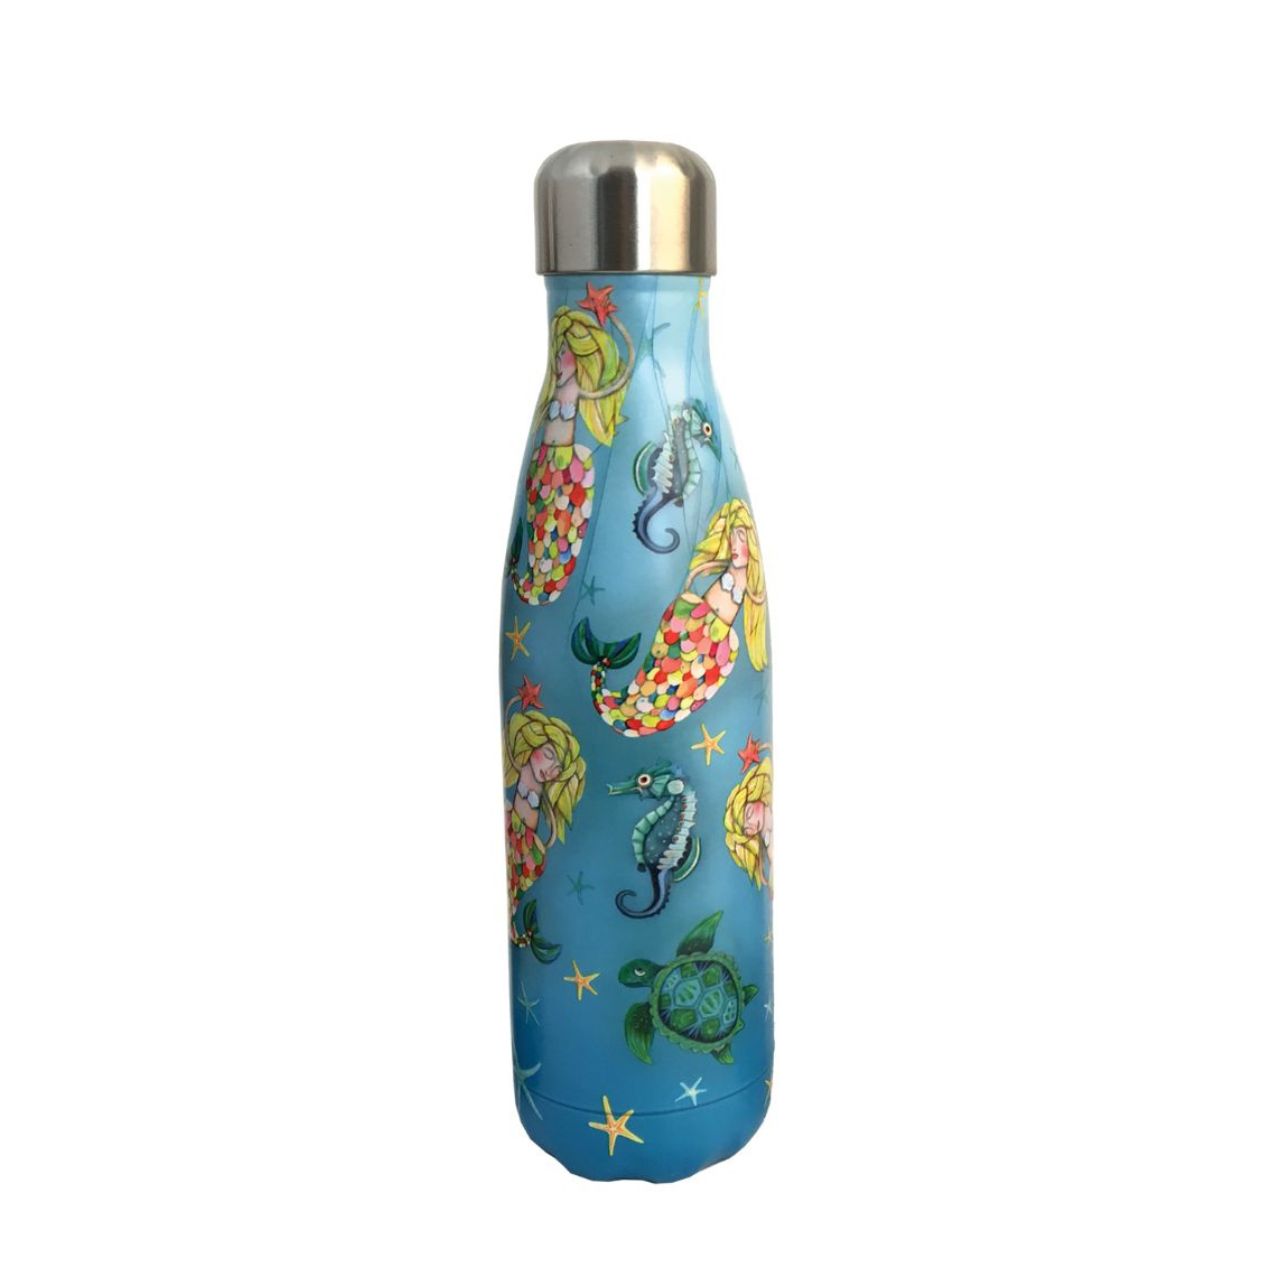 Allen Design Under The Sea Mermaid Water Bottle  Our Under The Sea Mermaid Reusable Water Bottle is made of high-quality, double-walled stainless steel. They are BPA-free and have a special spill-proof vacuum seal keeping your favourite beverage inside hot or cold for at least 12 hours and up to 24 hours.